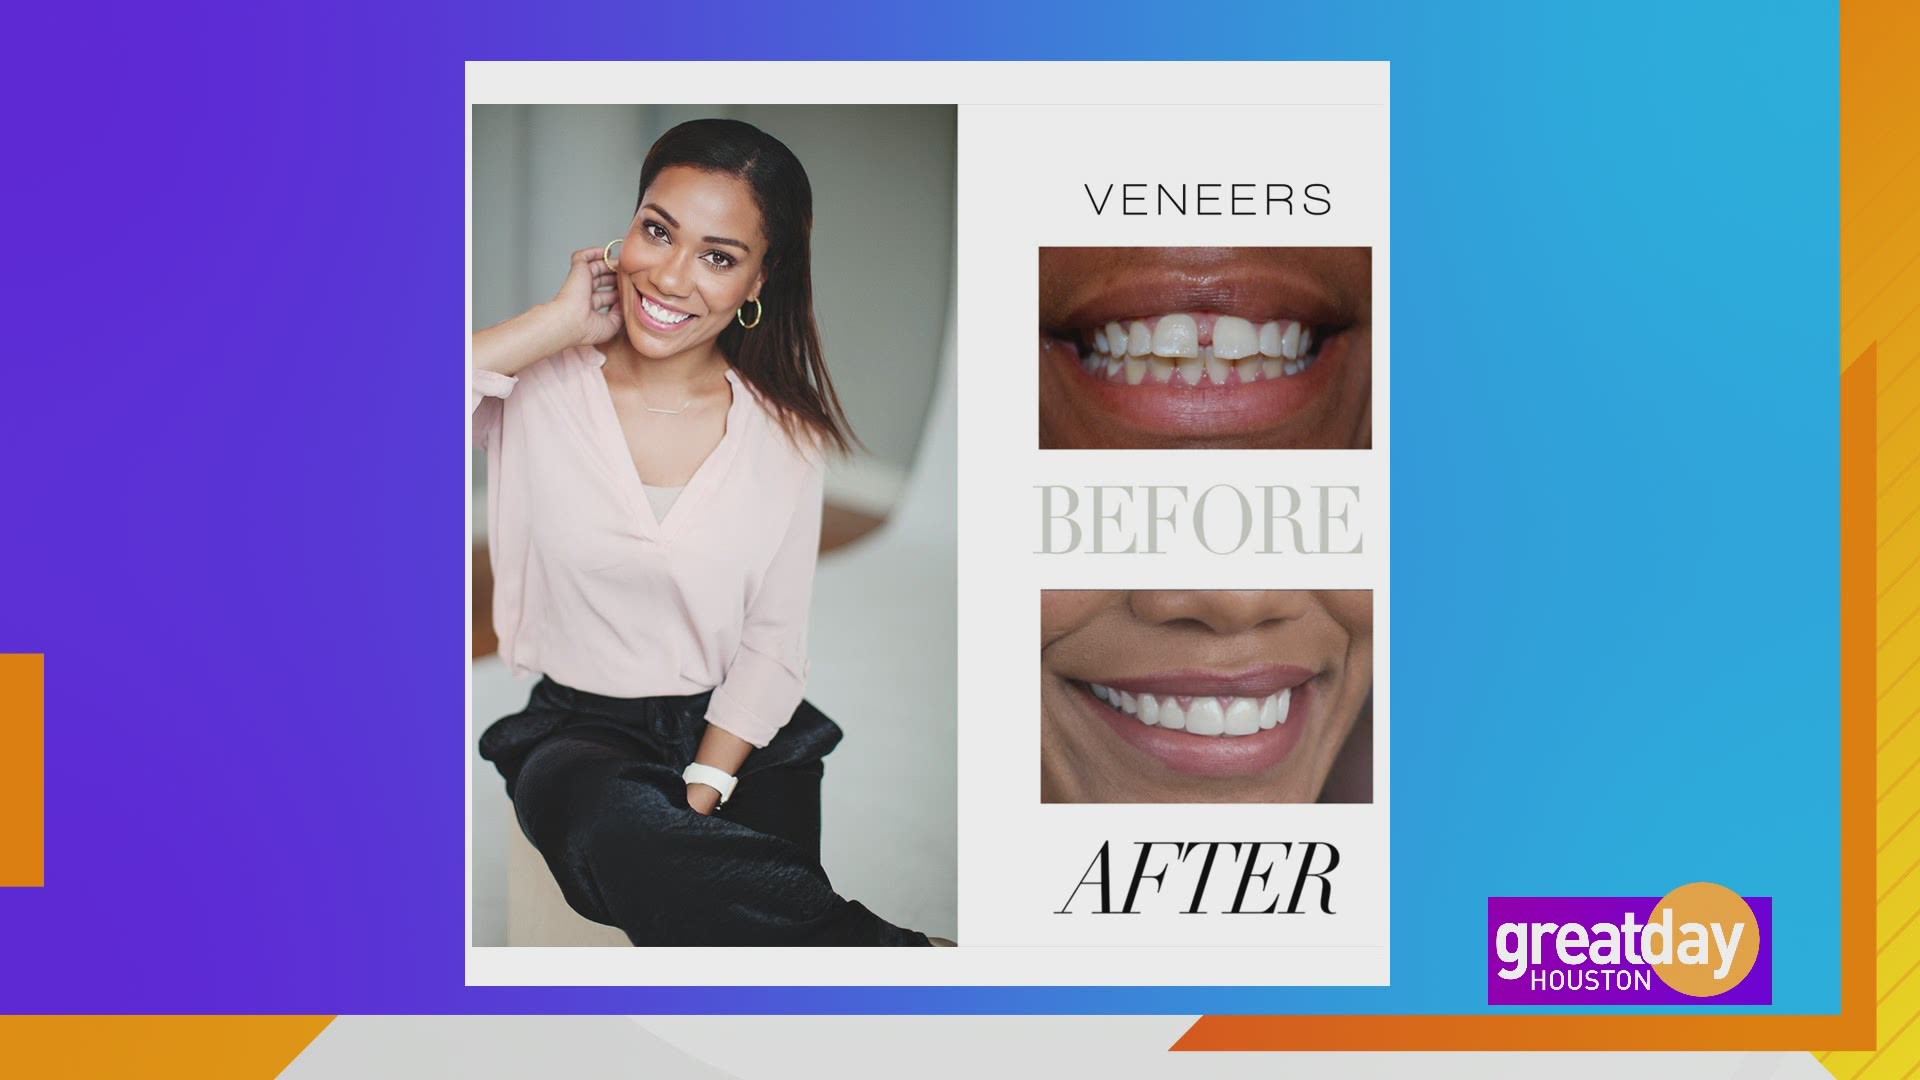 Amy Vanderoef explains how MINT Dentistry offers all oral healthcare services in one place, with the most advanced technology